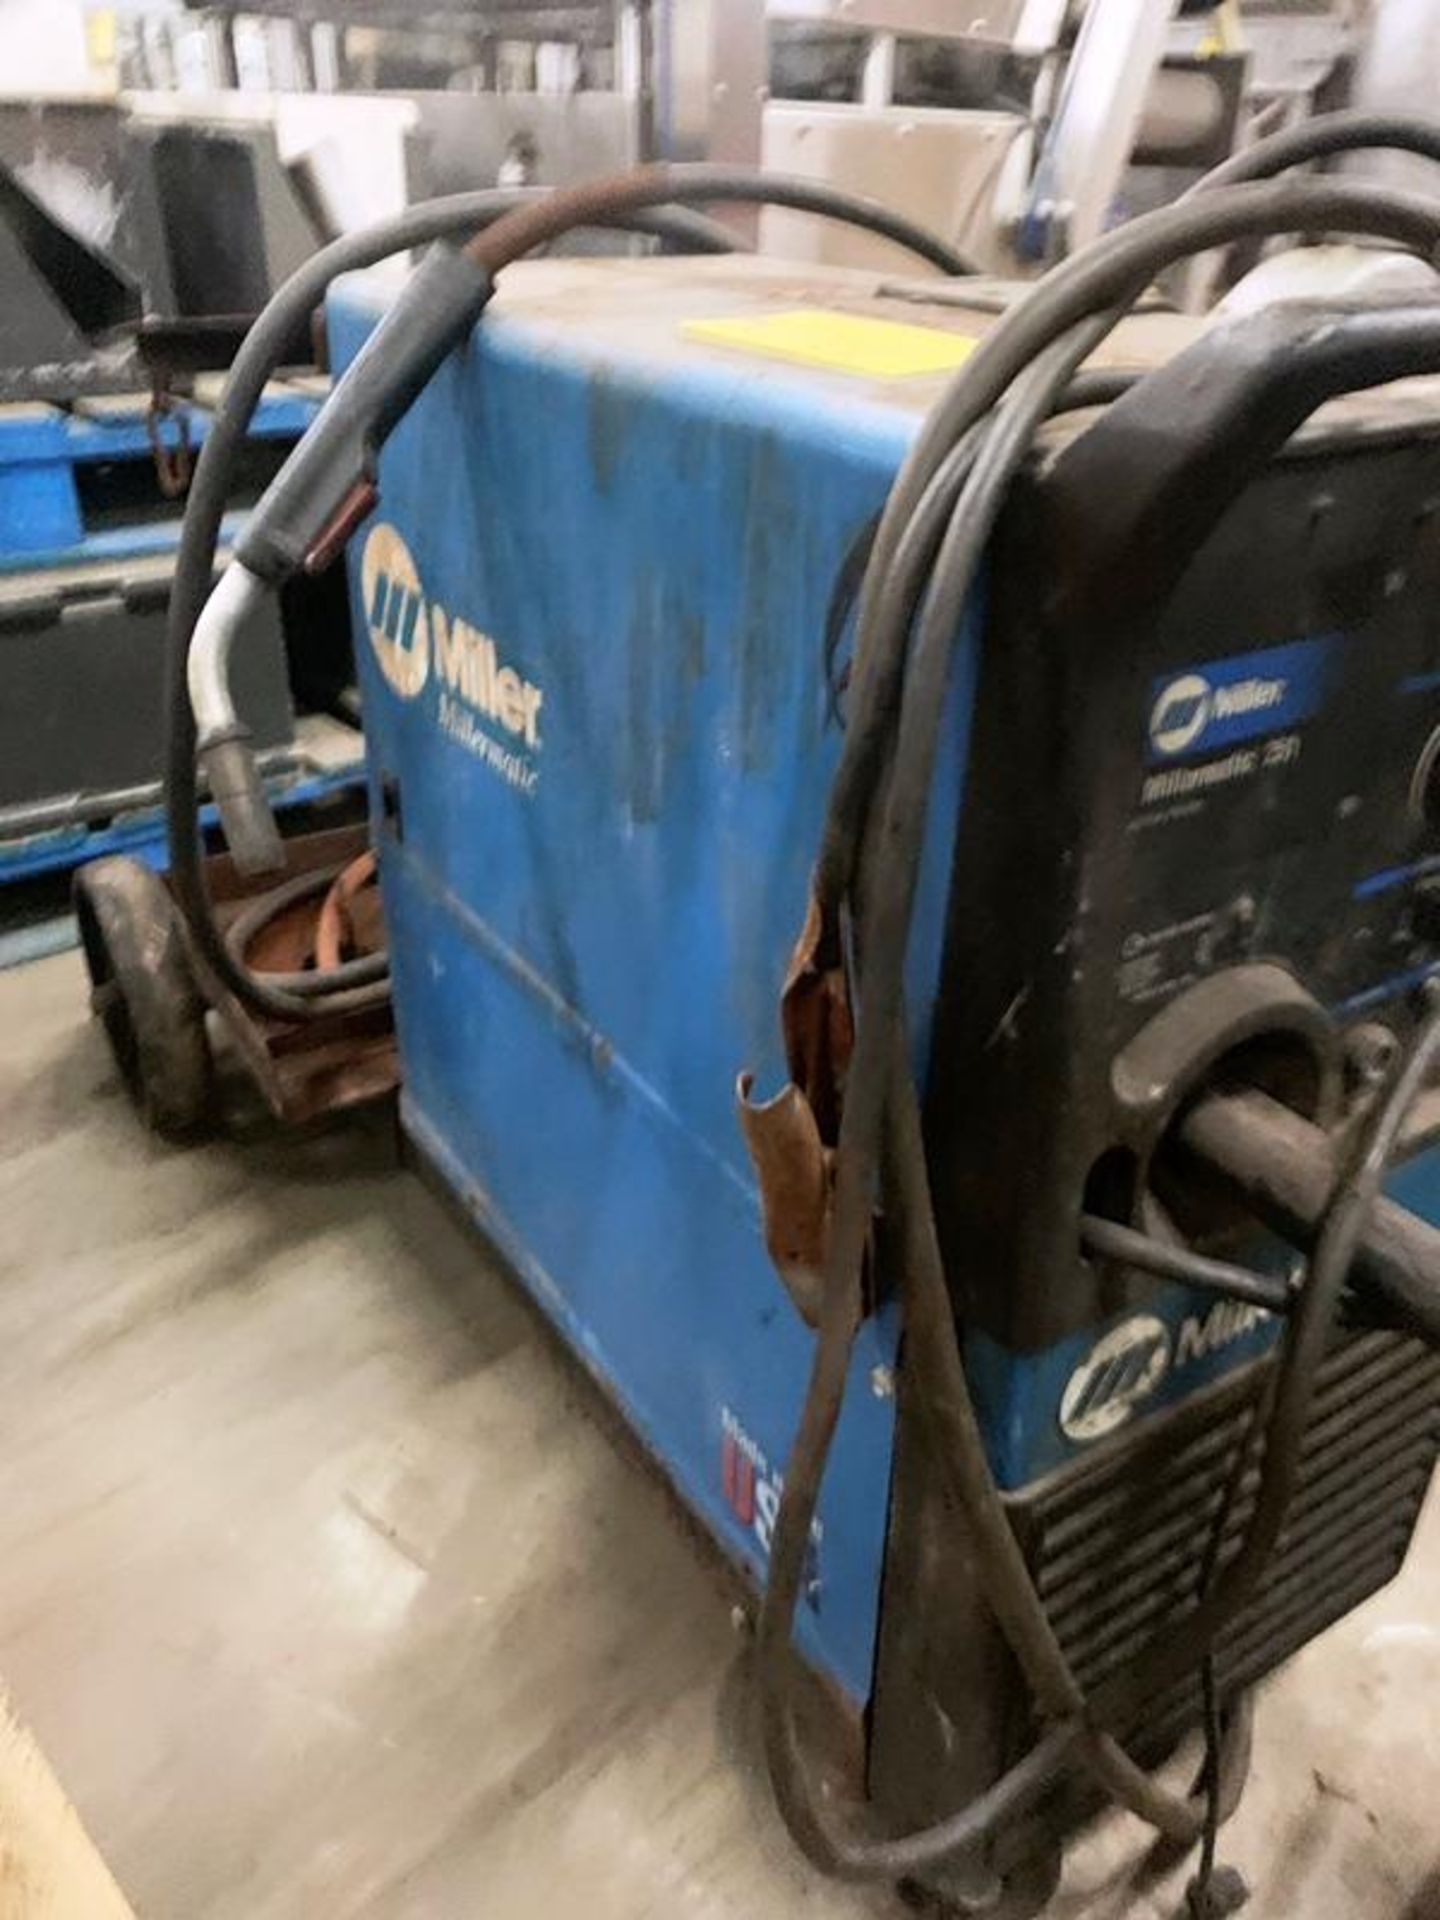 Miller Matic 251 Welder, Ser. #LB242869m 200/230 volts, 1 phase (Located in Sandwich, IL) - Image 3 of 6